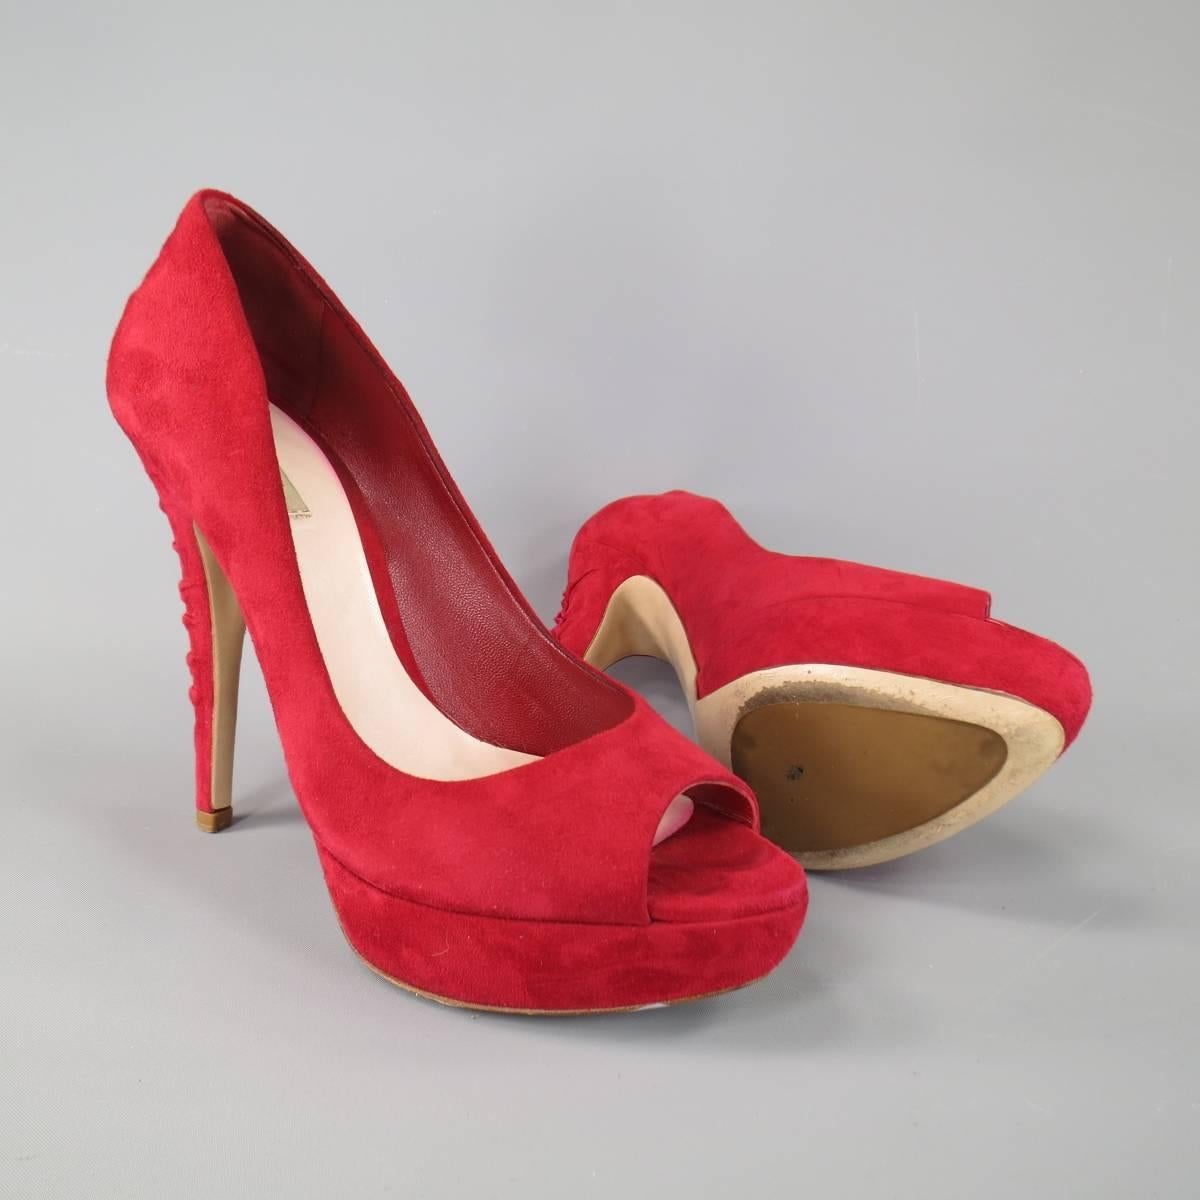 These fabulous MIU MIU pumps come in a rich red suede and feature a peep toe with platform and covered heel with gathered ruffle effect down the back. Minor wear on suede. Made in Italy. With Box.
 
Good Pre-Owned Condition.
Marked: IT 38.5
